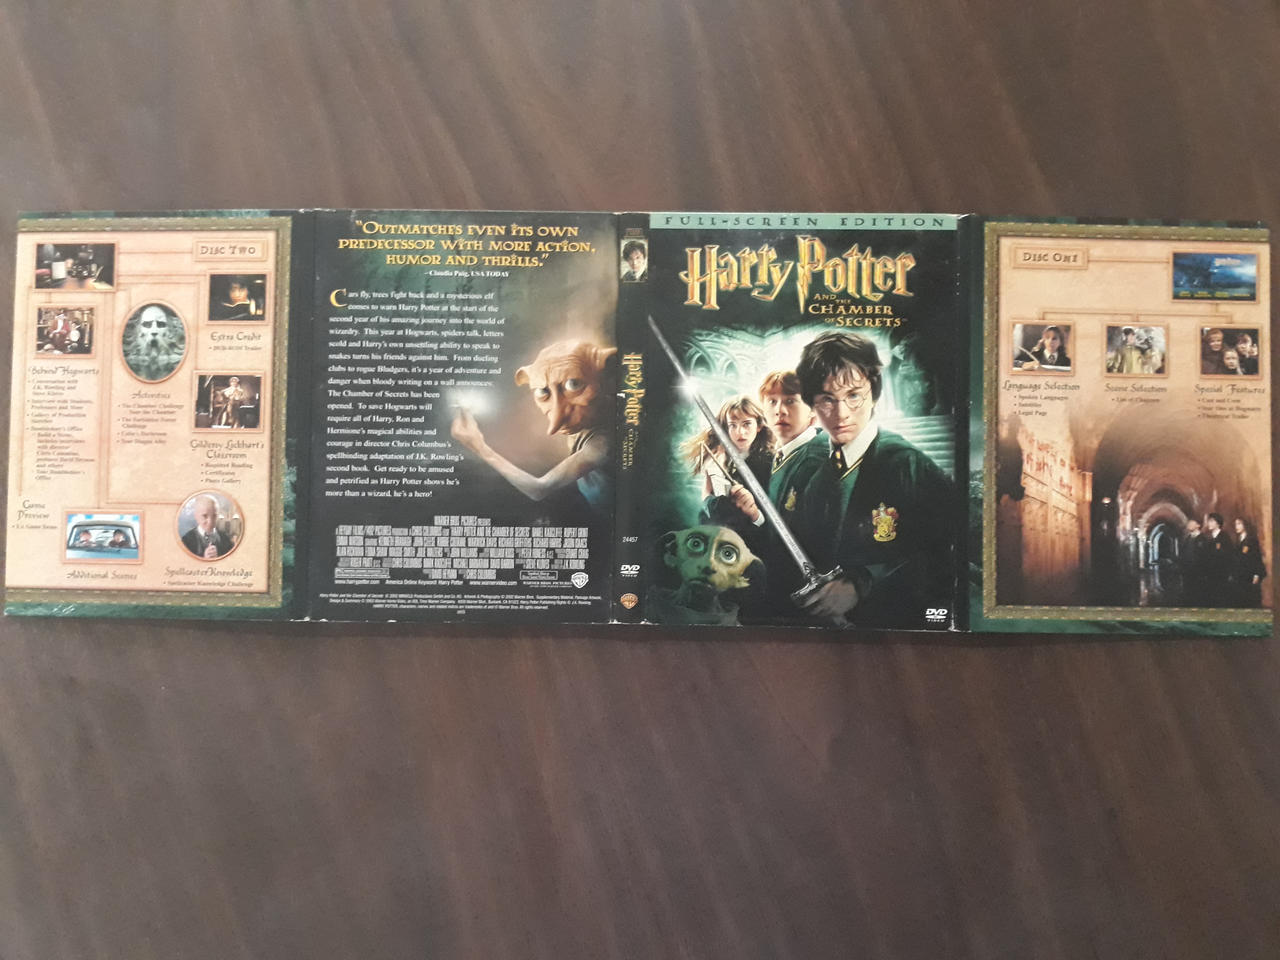 Harry Potter And The Chamber Of Secrets DVD 20 by PoleWheat1975 on